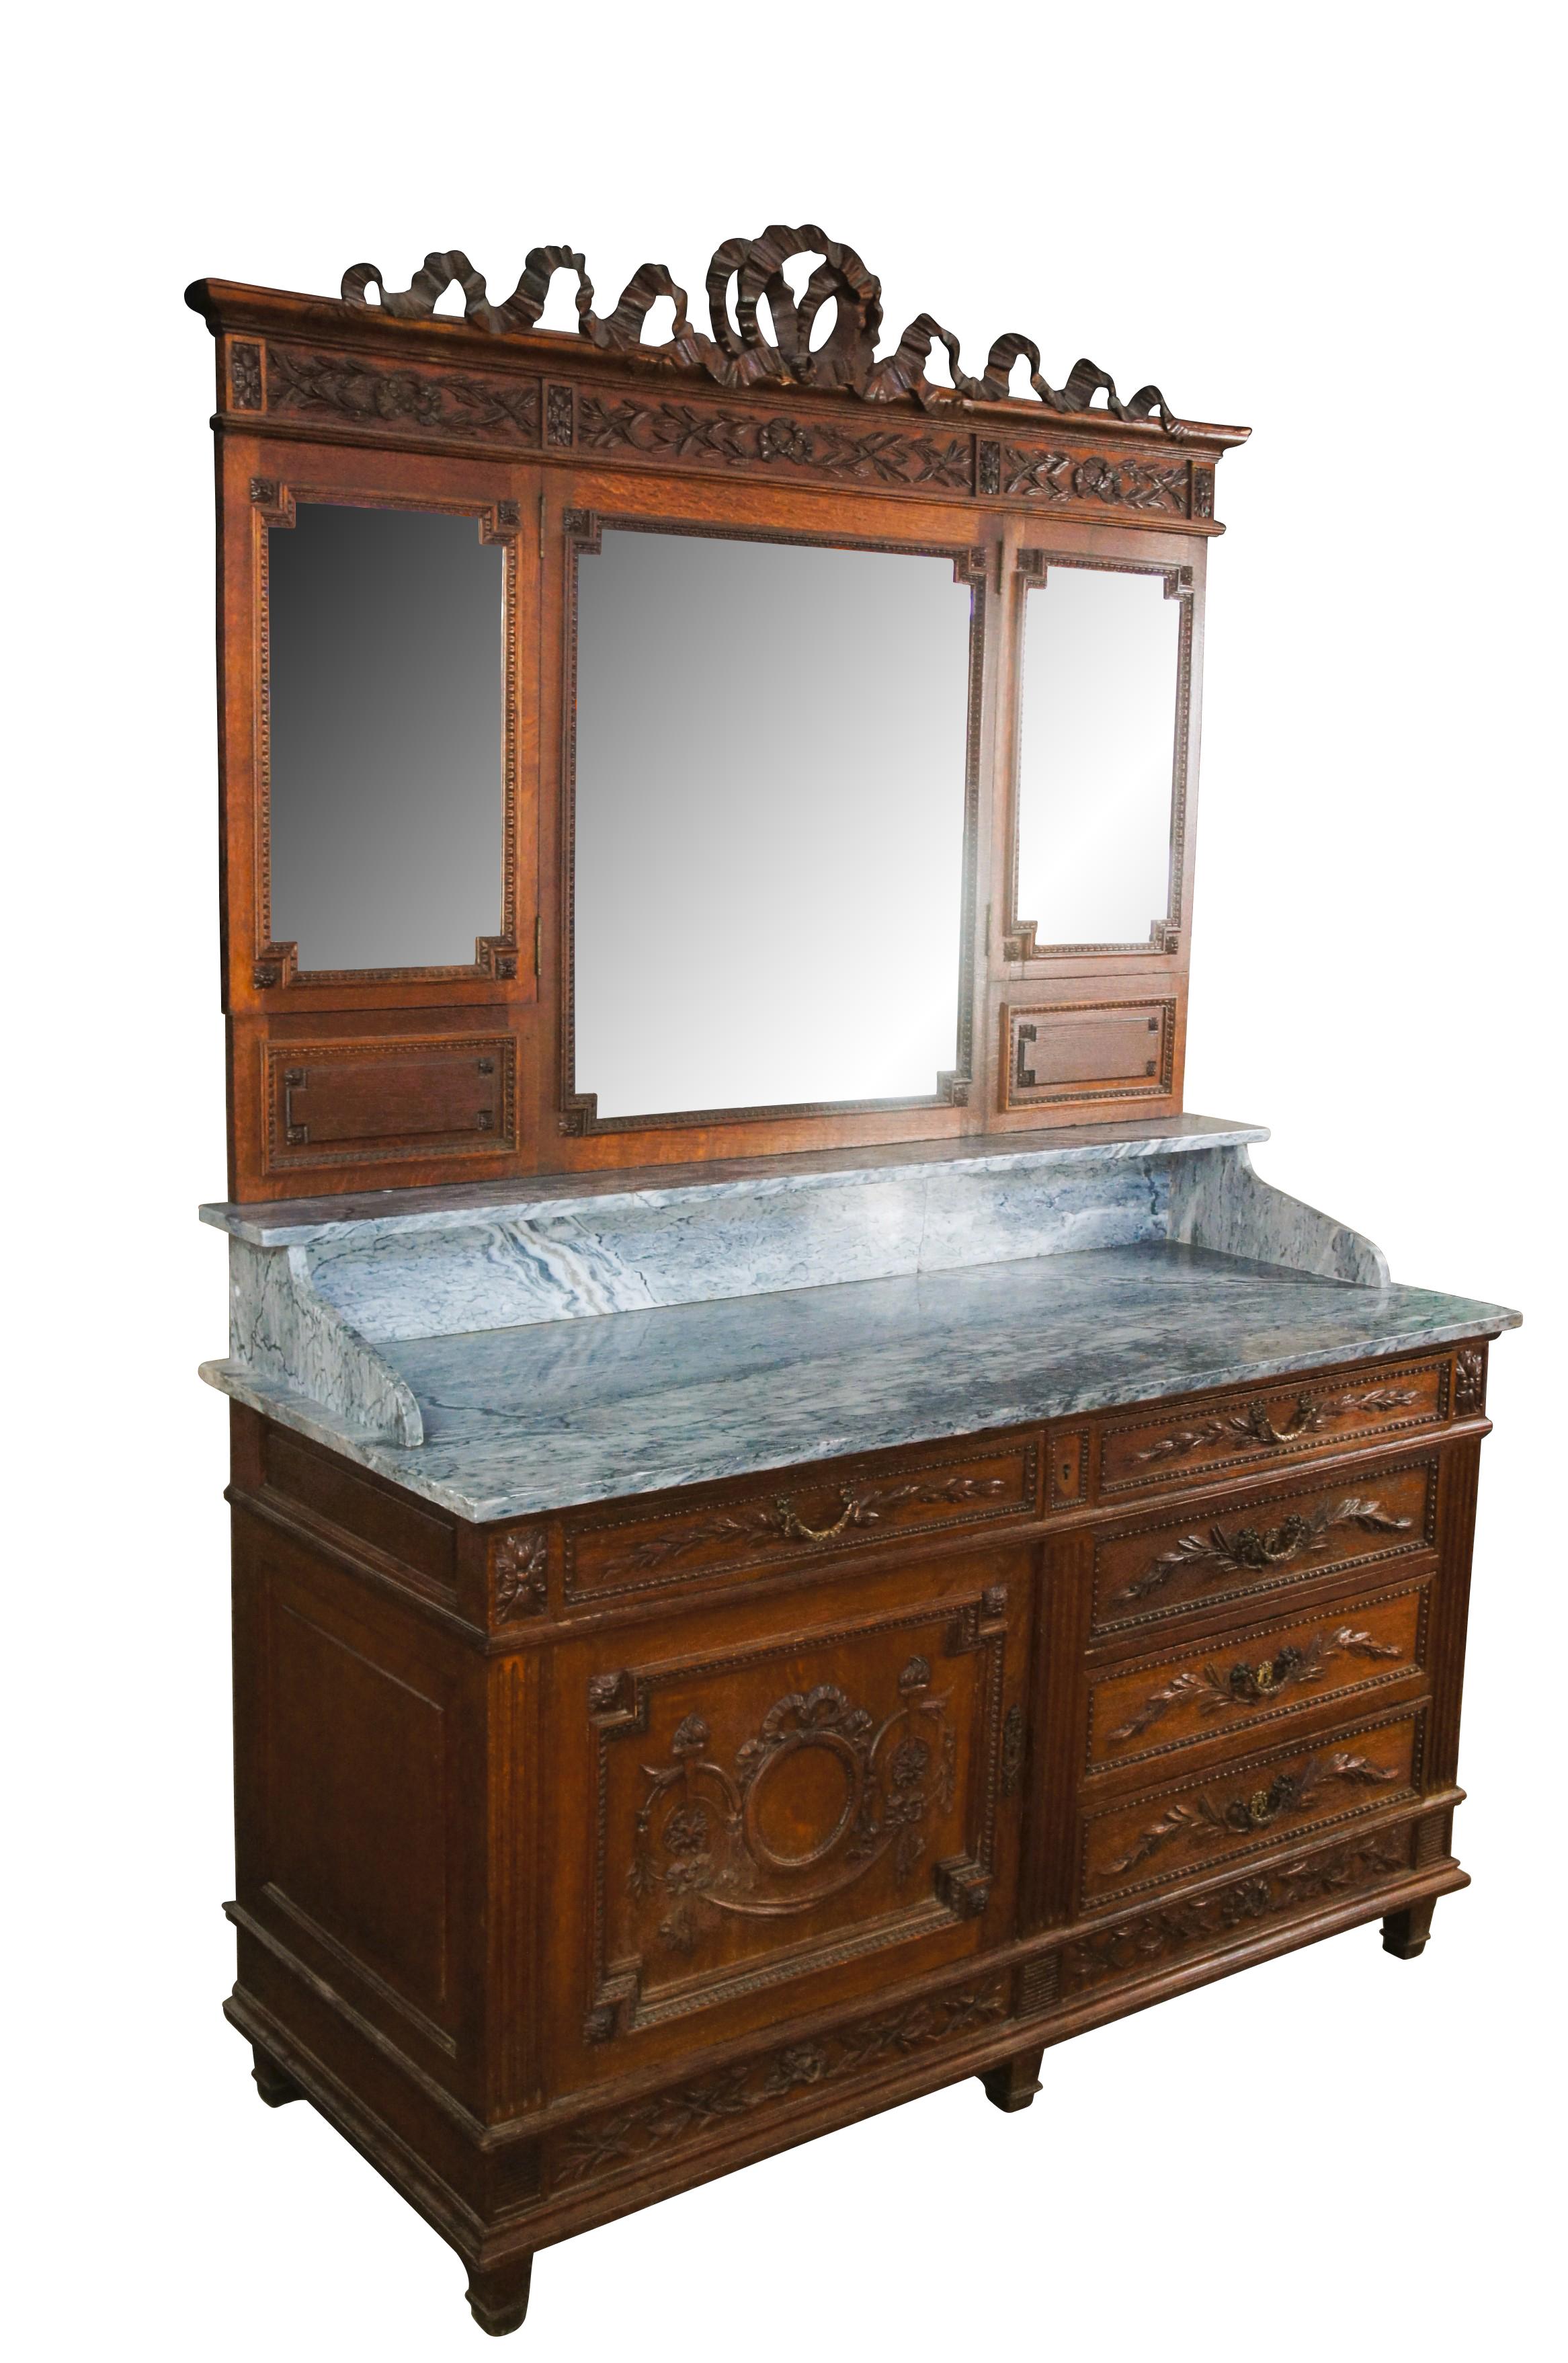 Impressive antique French Louis XV sideboard vanity / server / wash basin / buffet.  Made of quartersawn oak featuring Neoclassical styling with carved ribbon and bow crown over three beveled adjustable mirrors.  Supported by marble top base that